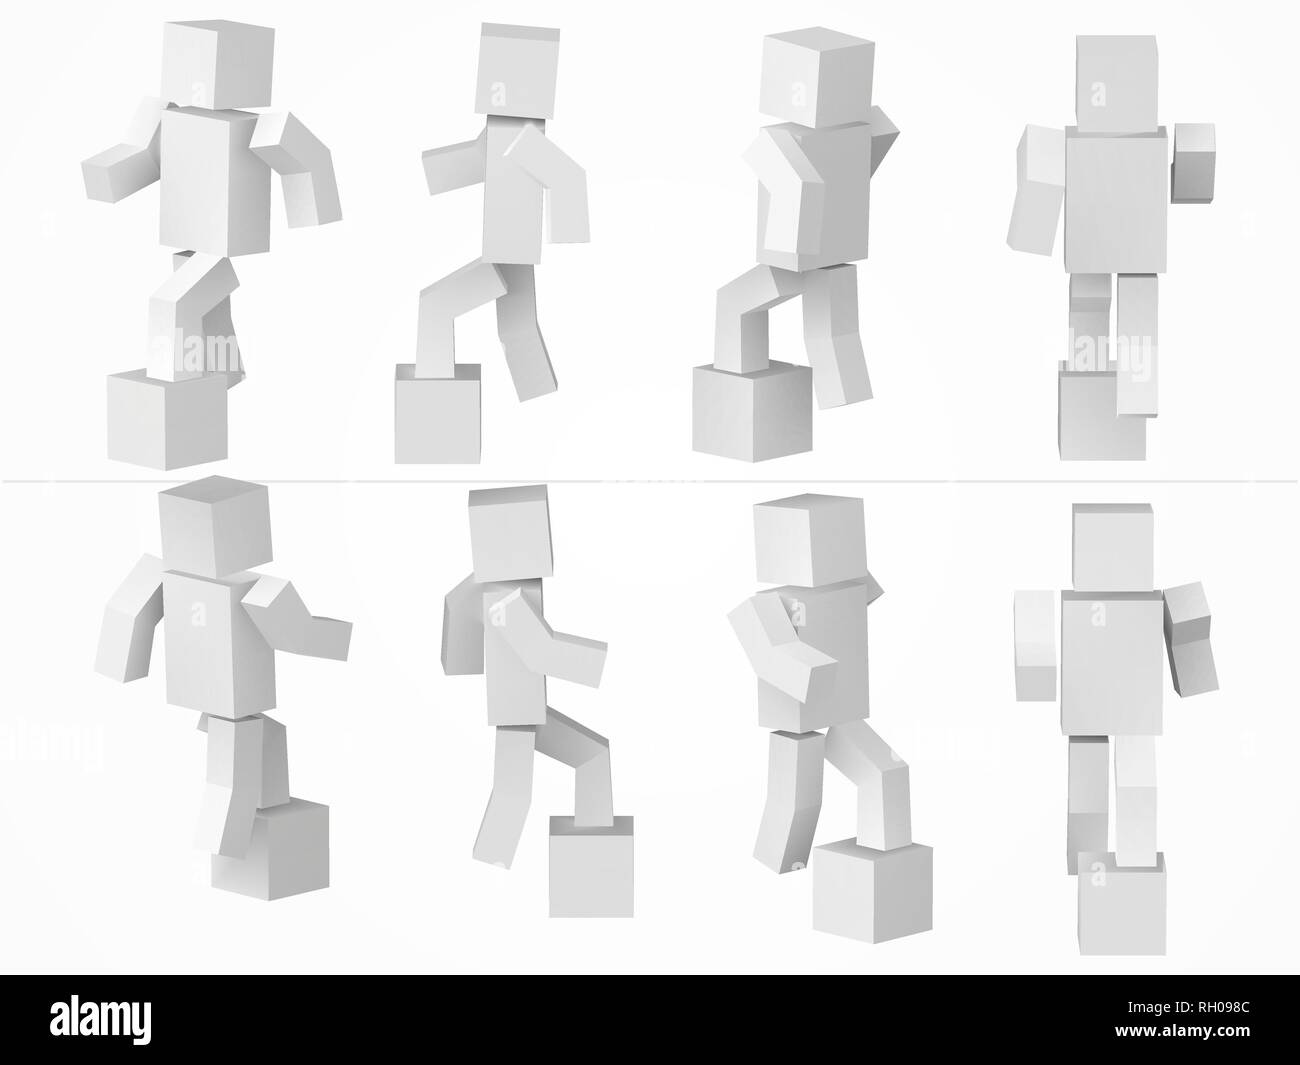 a cubic character climbing to box. 3d style simple cube character illustration. Stock Vector